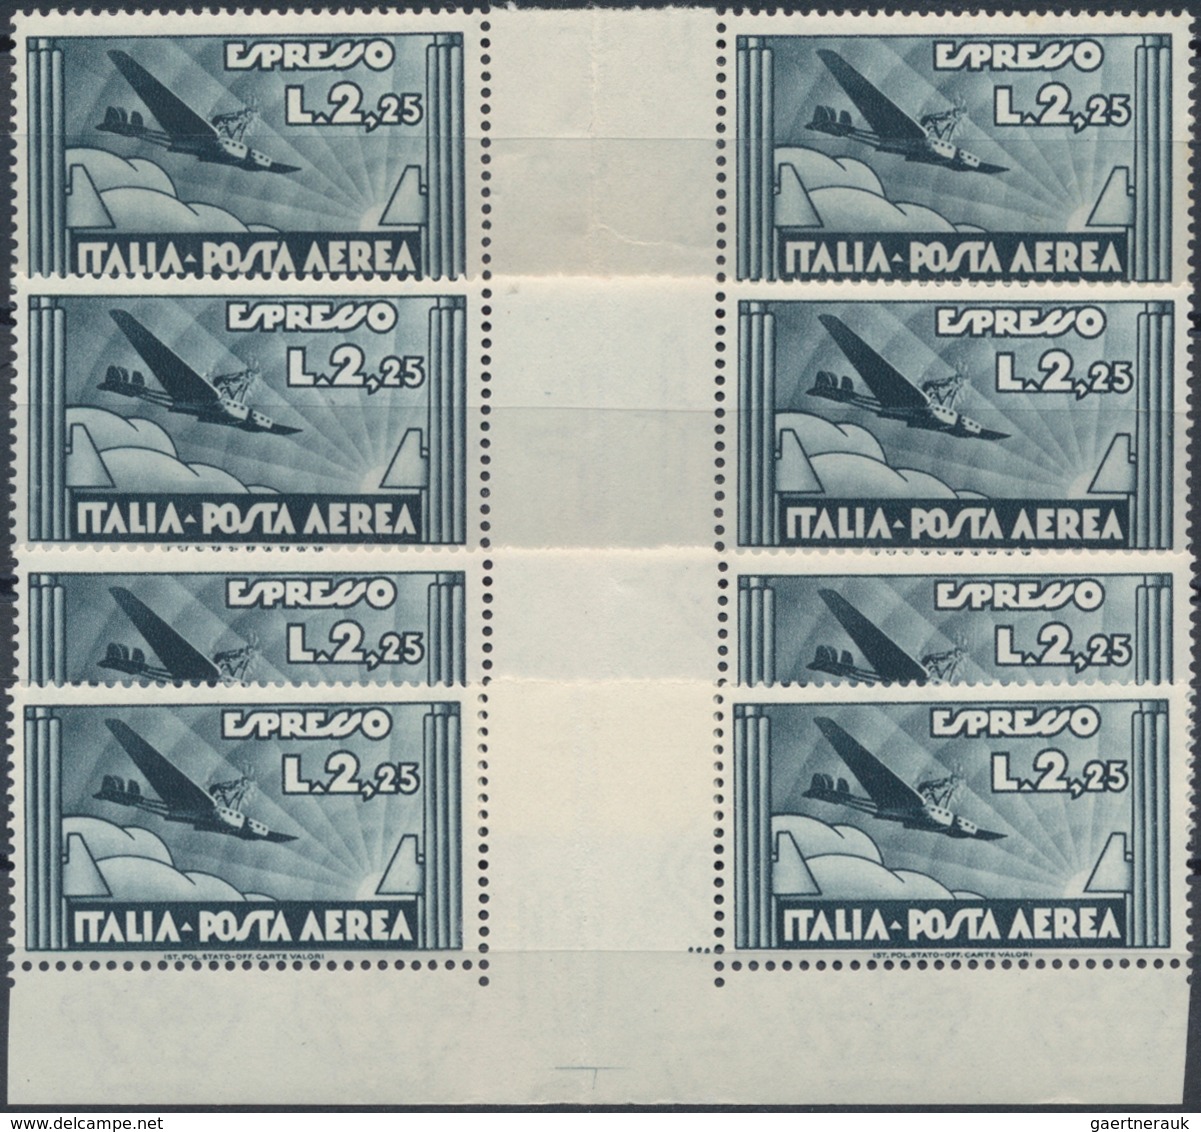 Italien: 1934, "THE MINT ITALY INVESTMENT STOCK" Including Fiume Decennial Issue Five Values 25 C. G - Colecciones